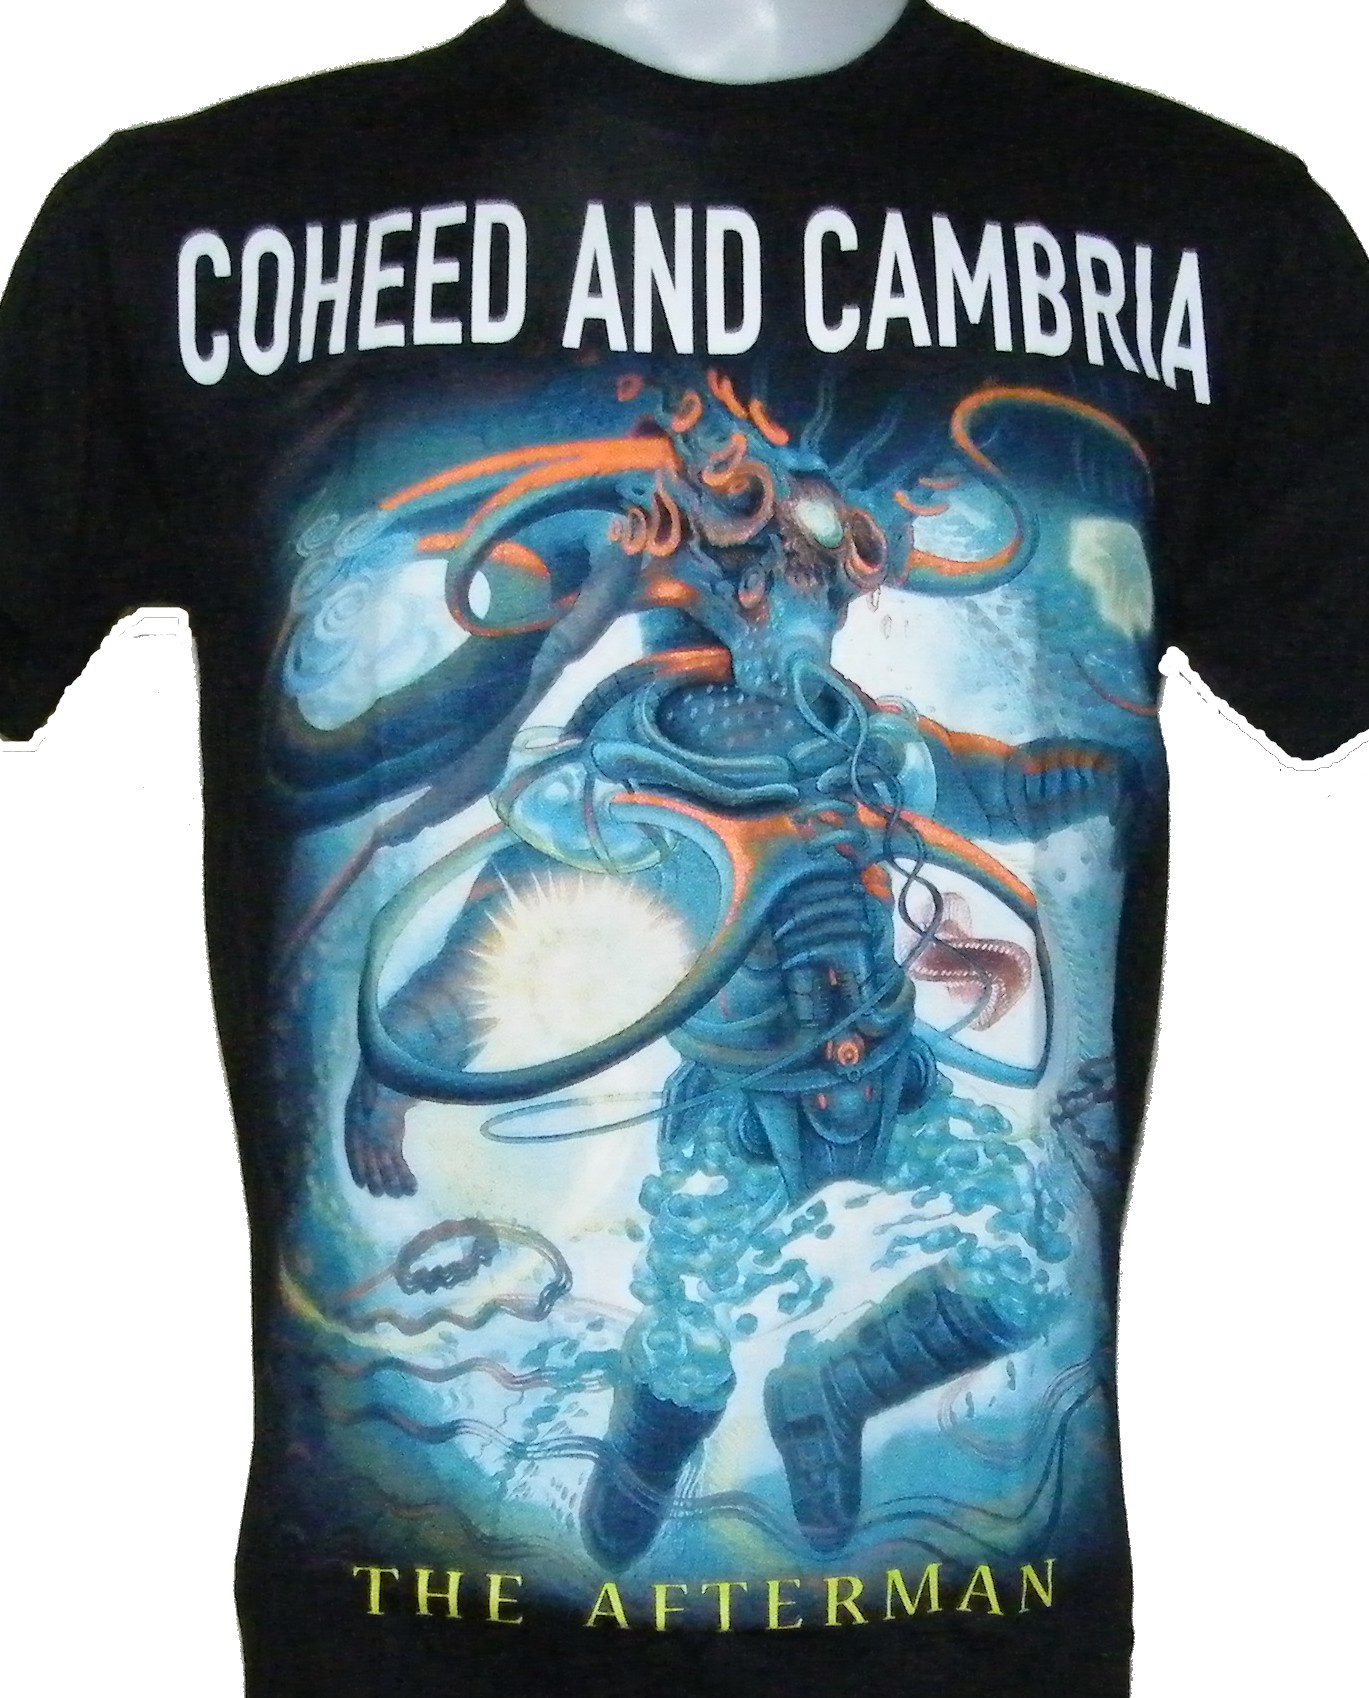 K-deio Man Big Size T Shirt Coheed and Cambria T Shirts Cool Oversize Tshirts Larger Waist Size